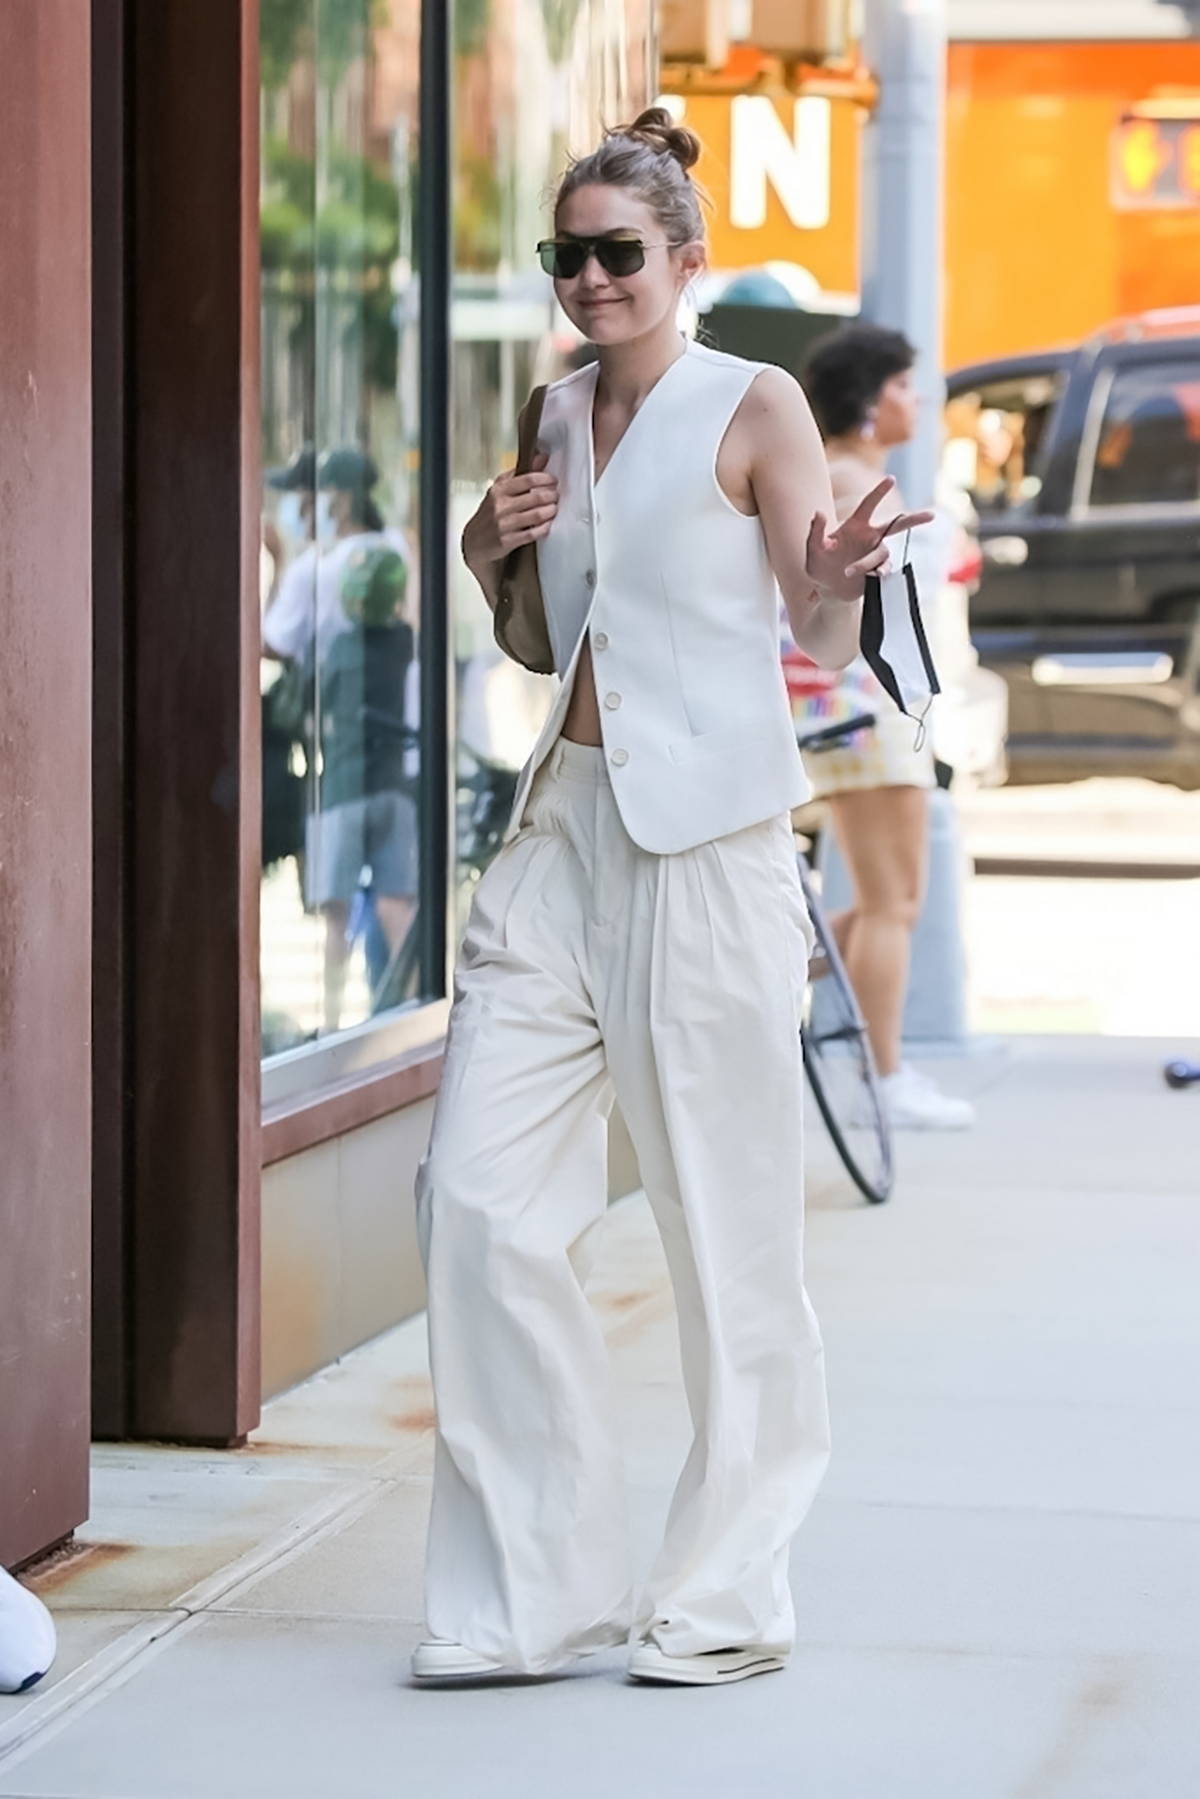 Hailey Bieber & Gigi Hadid's Off-Duty Looks To Die For, See Here